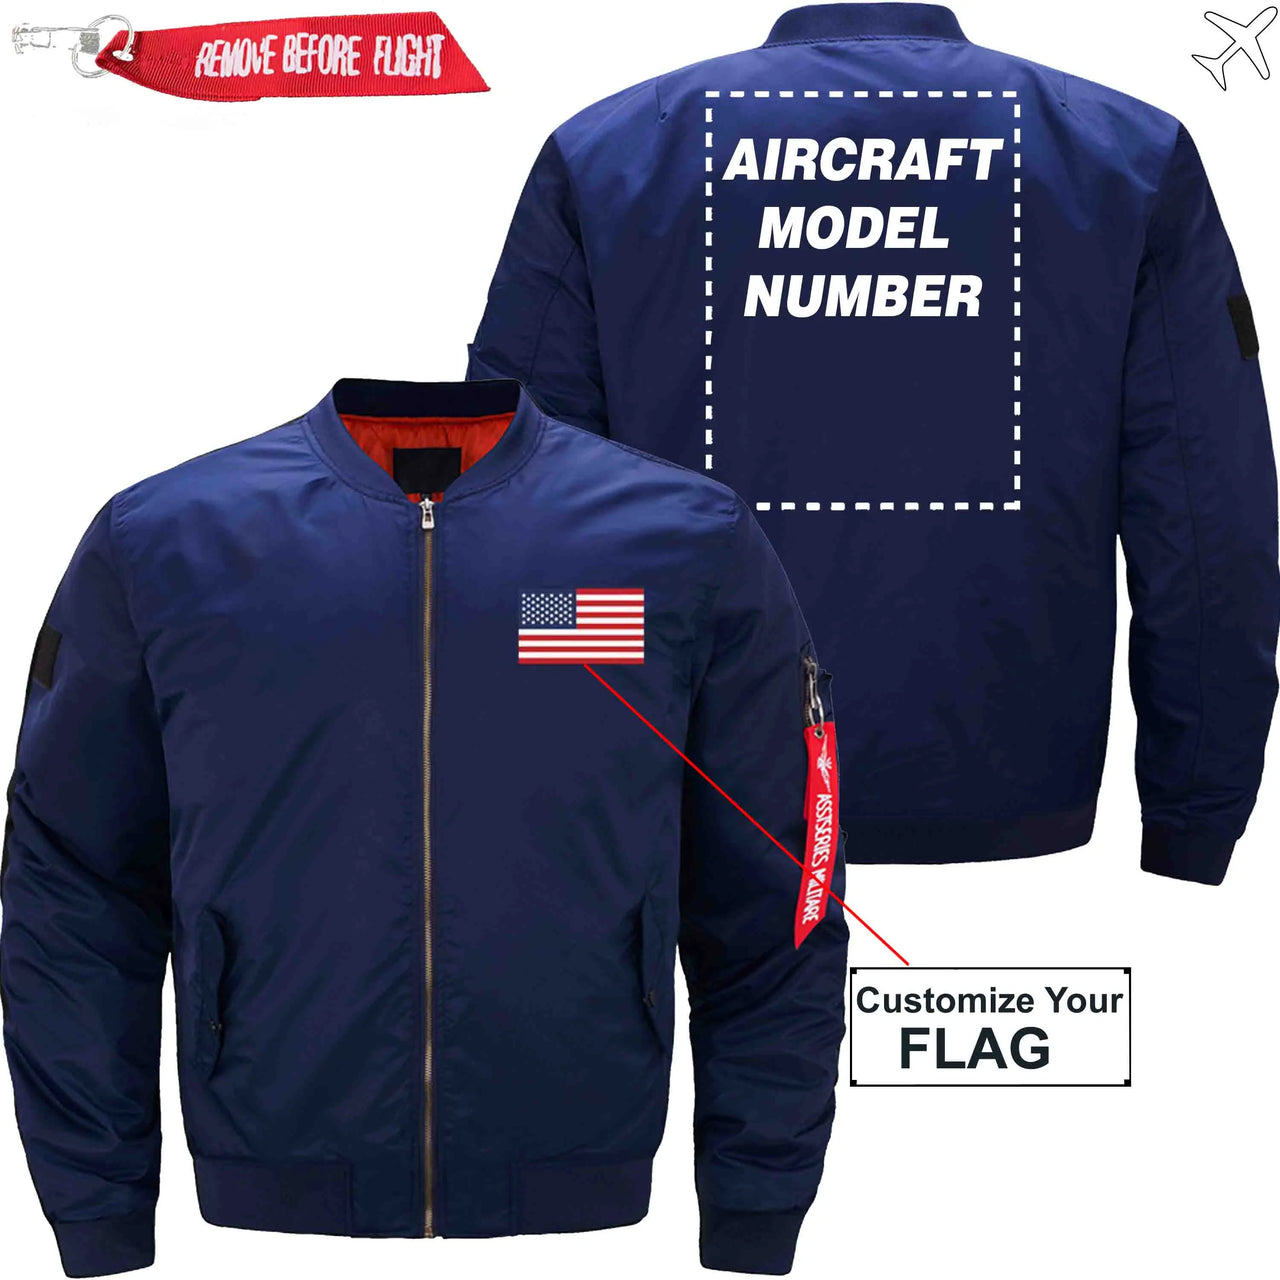 FLAG WITH AIRCRAFT MODEL NUMBER - JACKET THE AV8R